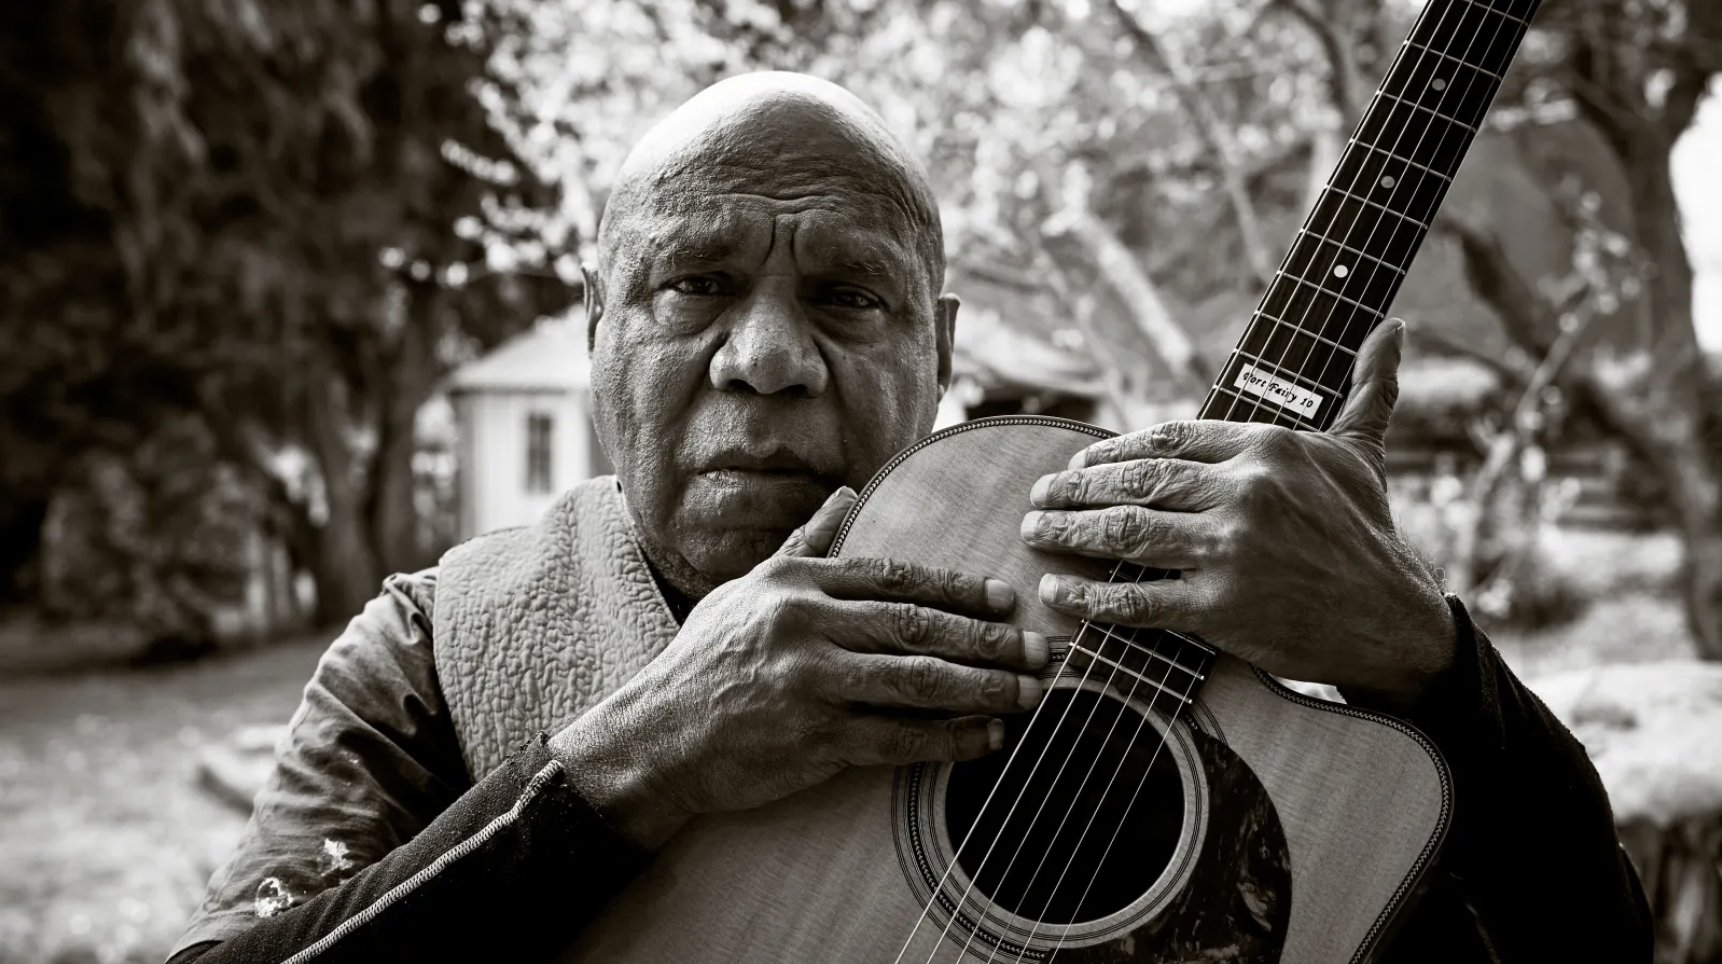 Black and white headshot of an older man holding a guitar with a house and trees in the background